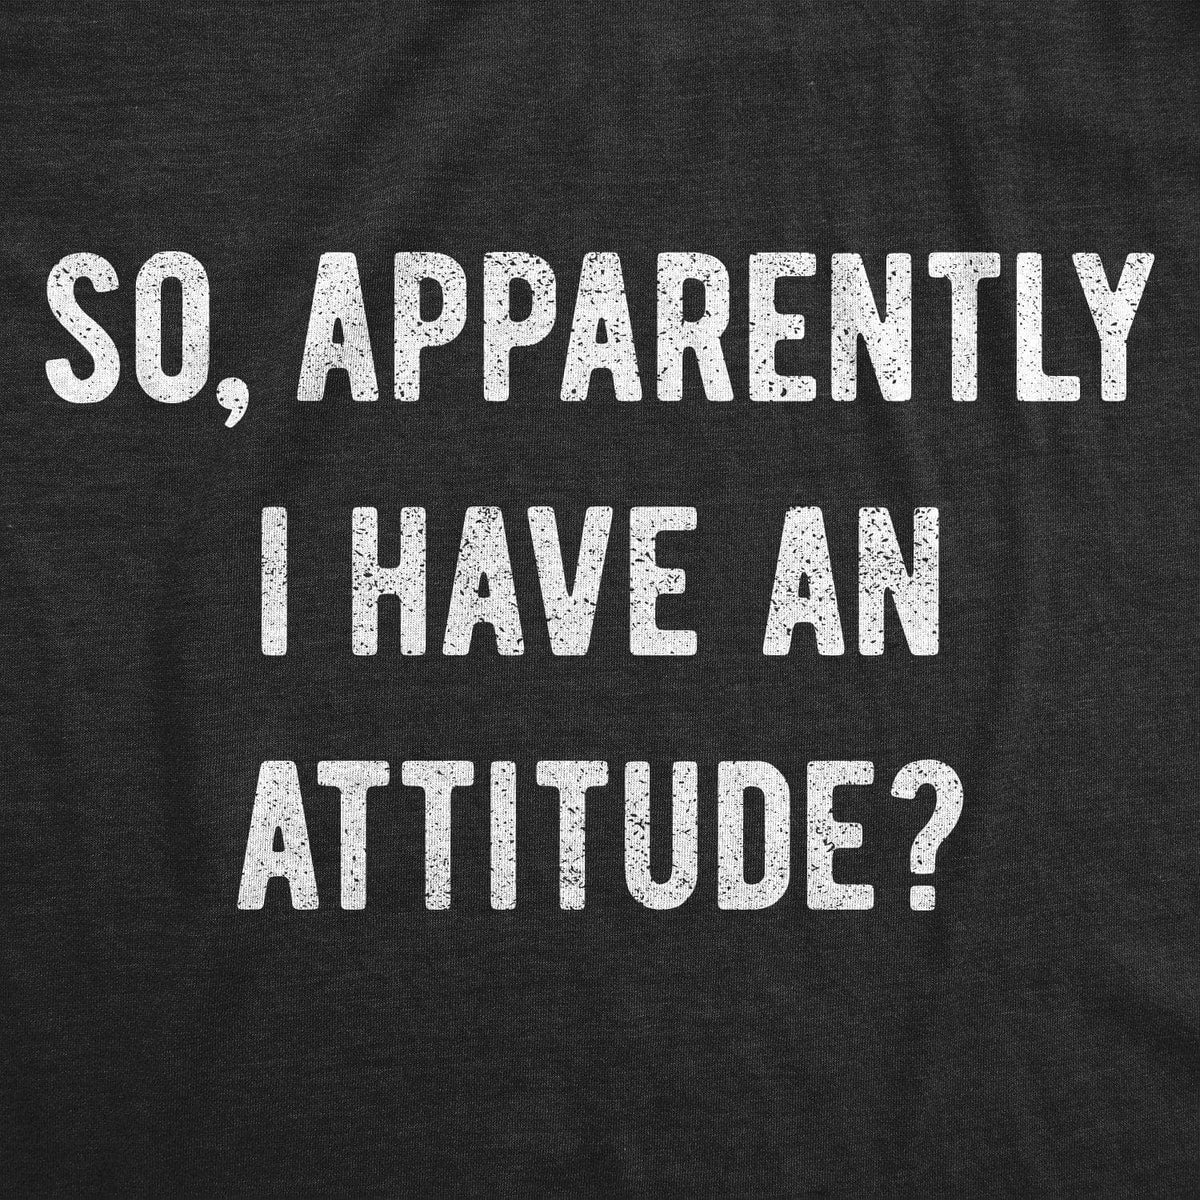 Apparently I Have An Attitude? Men&#39;s Tshirt  -  Crazy Dog T-Shirts